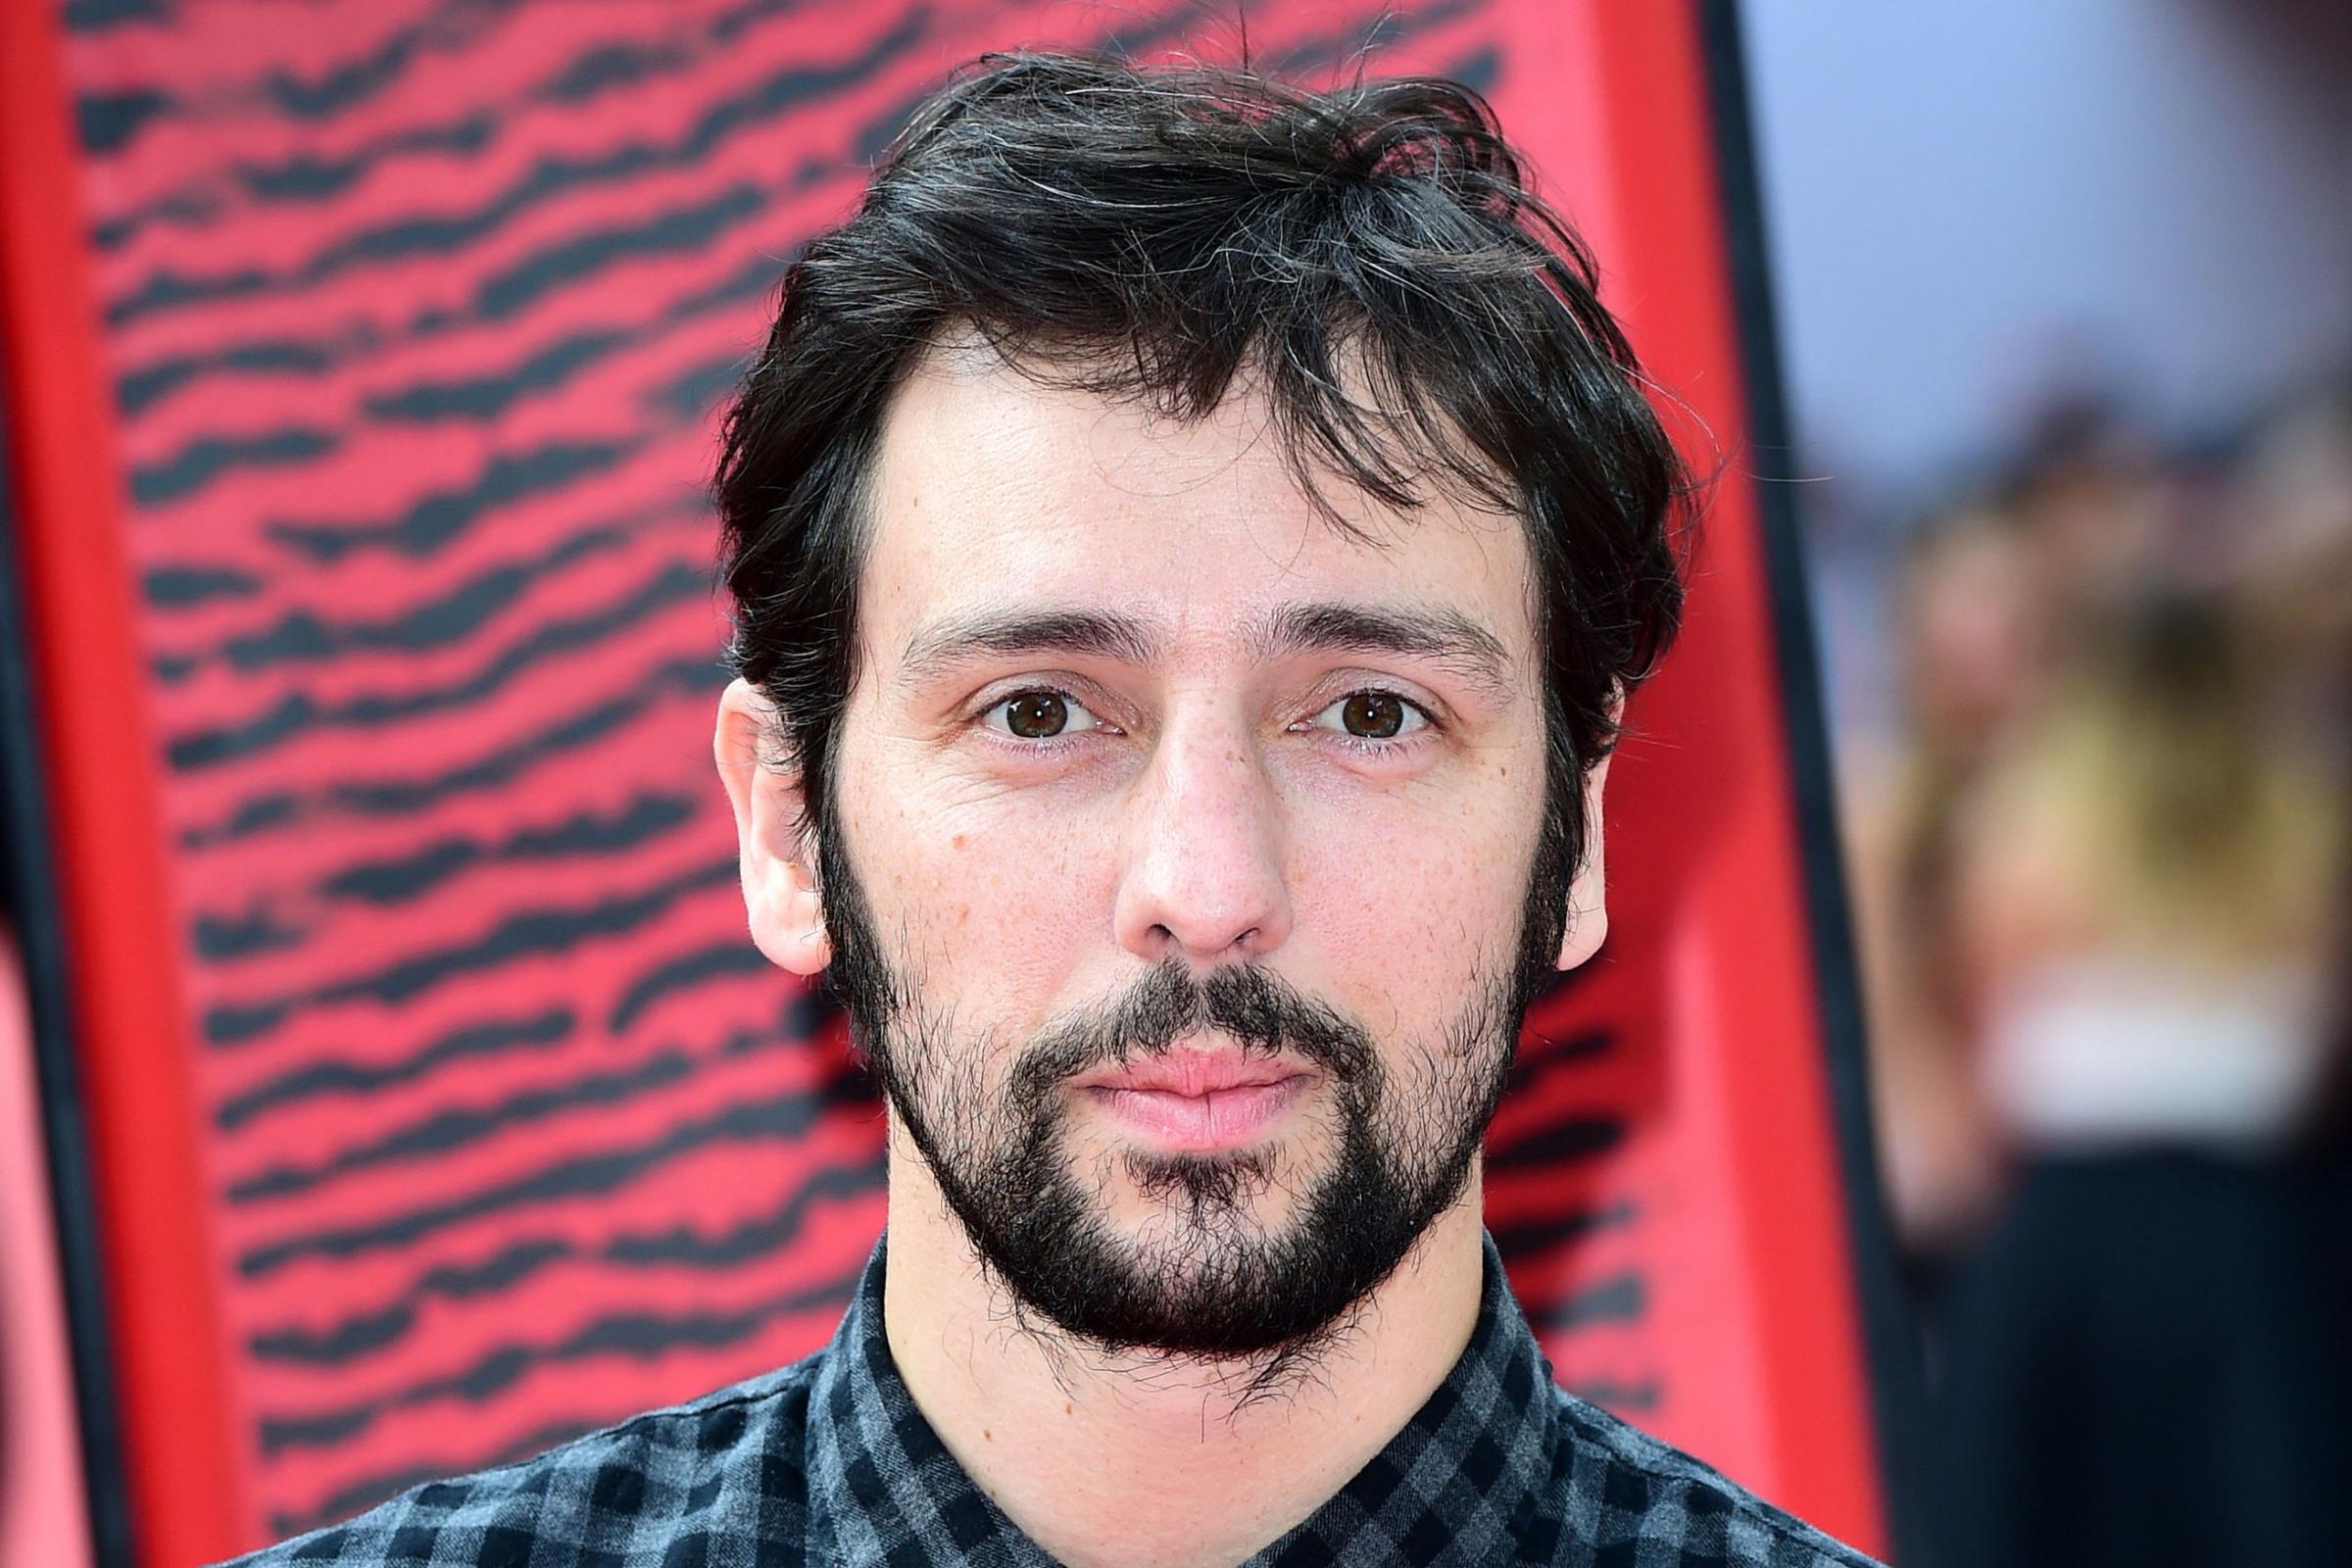 Actor Ralf Little 'suspended from Twitter' for mocking Tory 'factcheck' rebrand